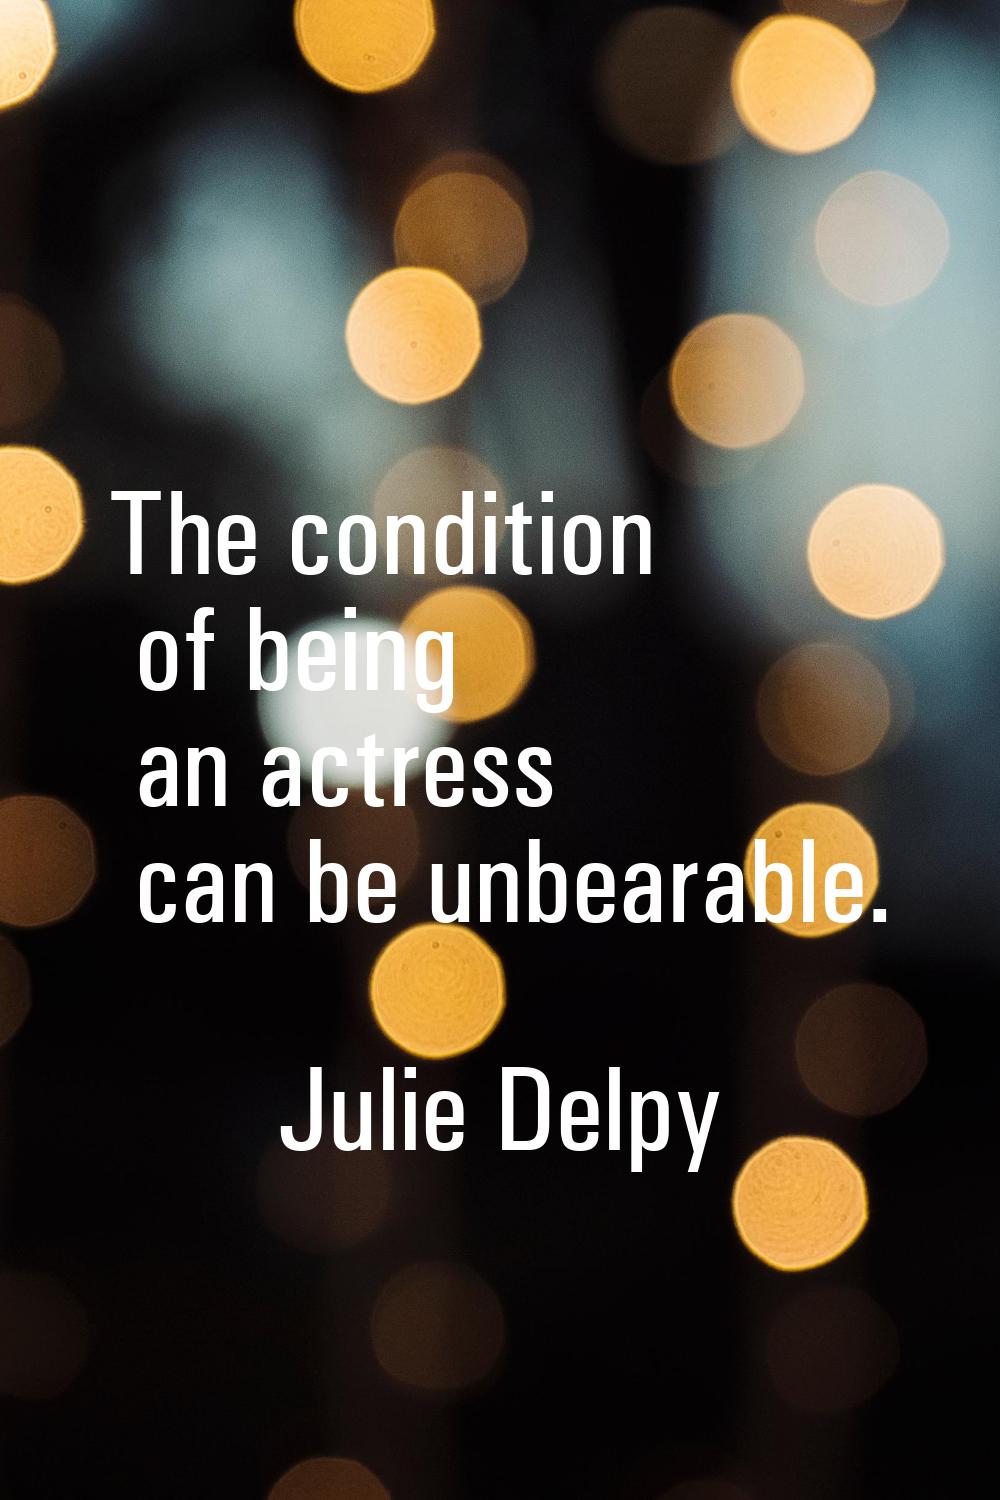 The condition of being an actress can be unbearable.